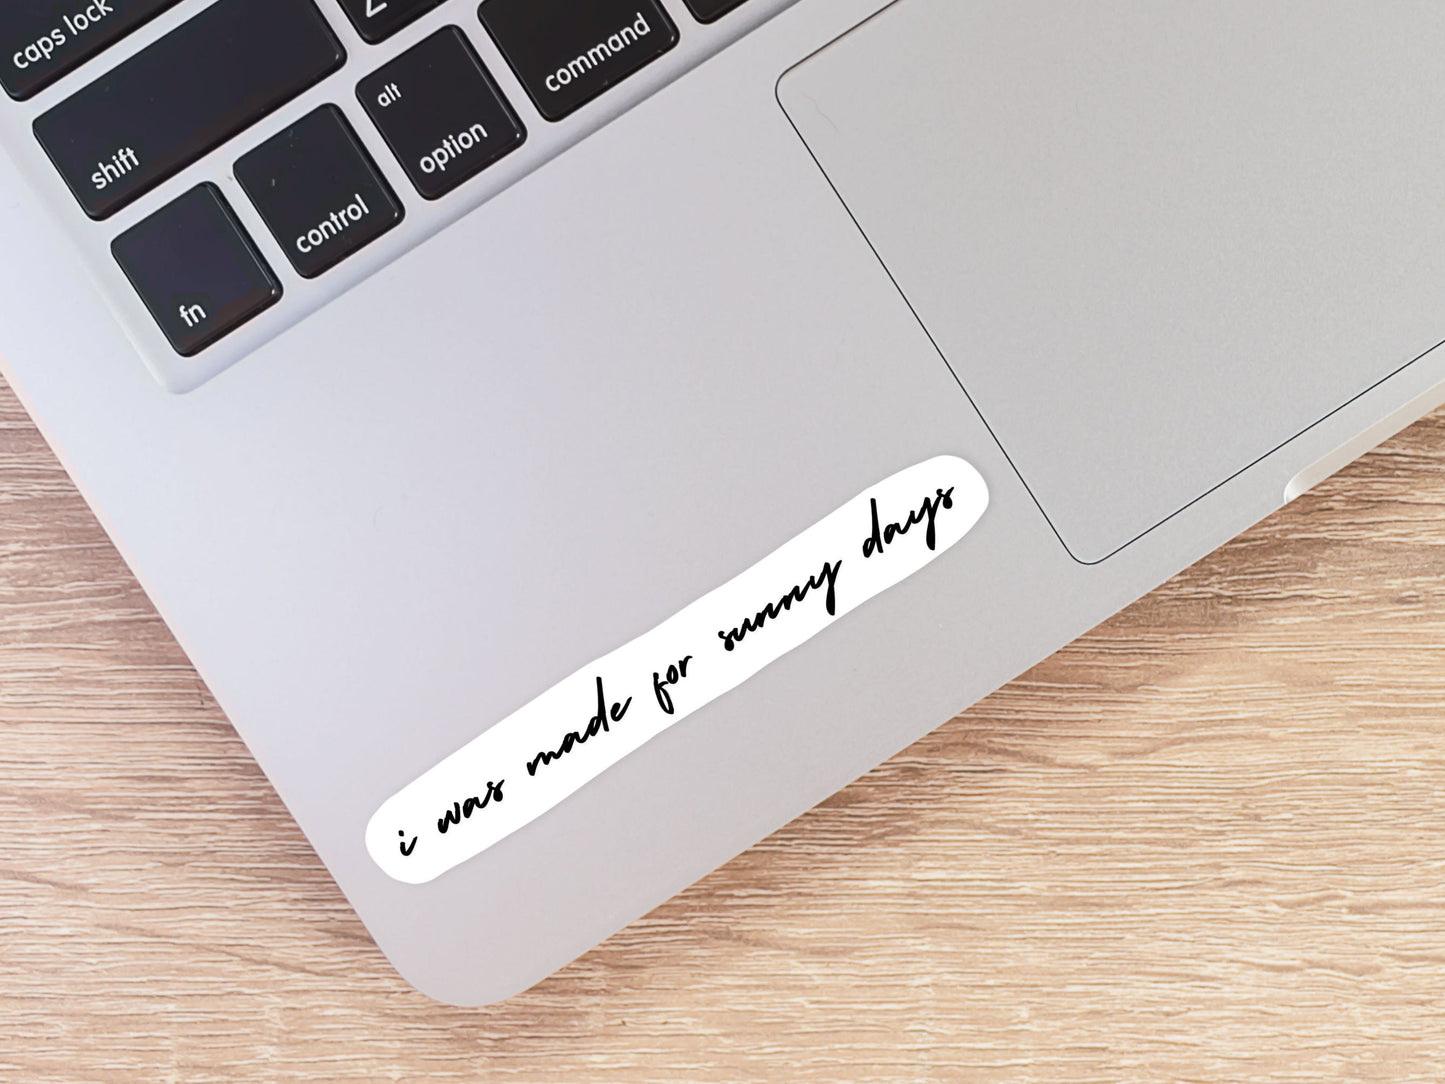 I Was Made For Sunny Days Sticker | Self-Love Stickers | Encouragement Laptop Sticker